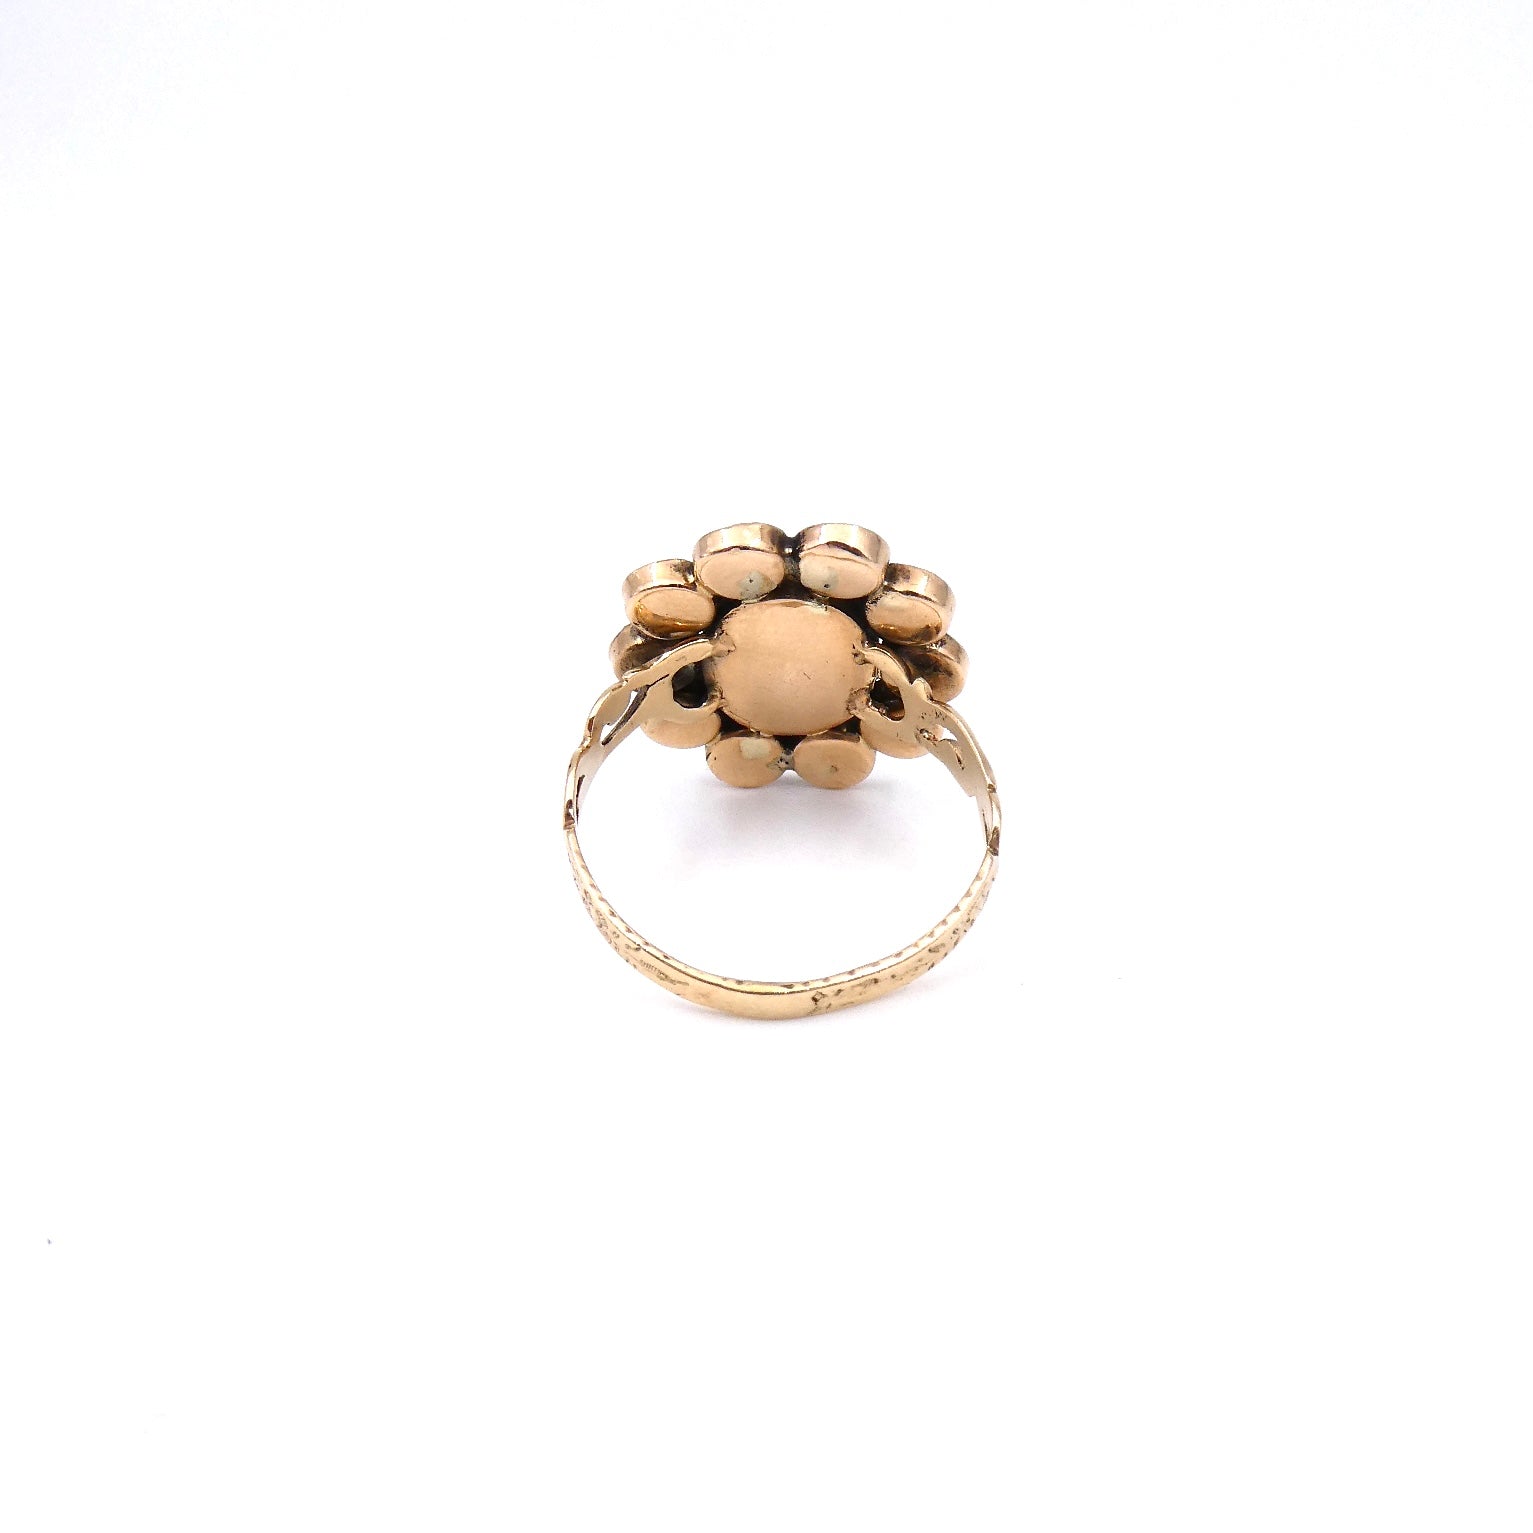 Georgian garnet and pearl ring, antique garnet pearl ring on an ornate gold band. - Collected